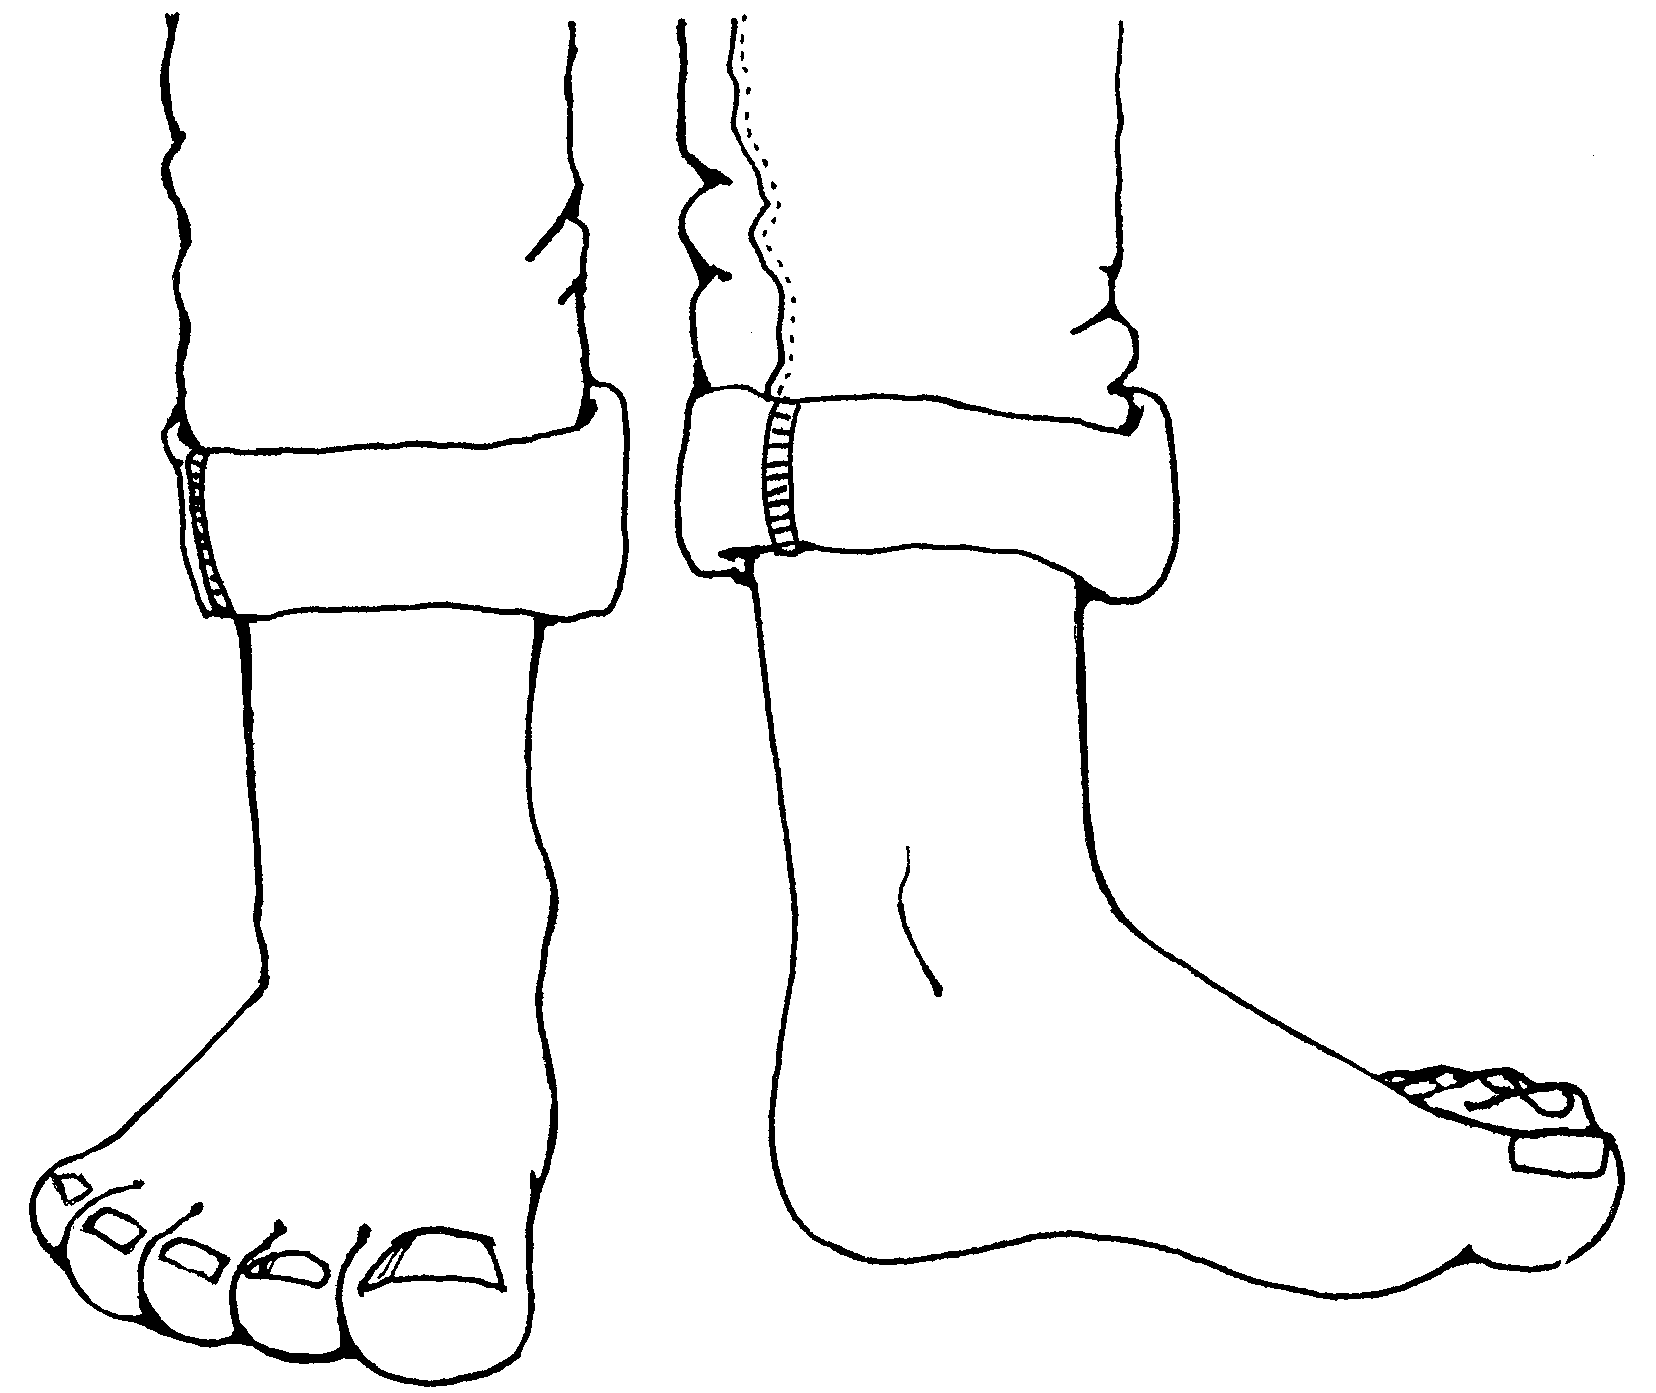 Free Feet Cliparts, Download Free Clip Art, Free Clip Art on.